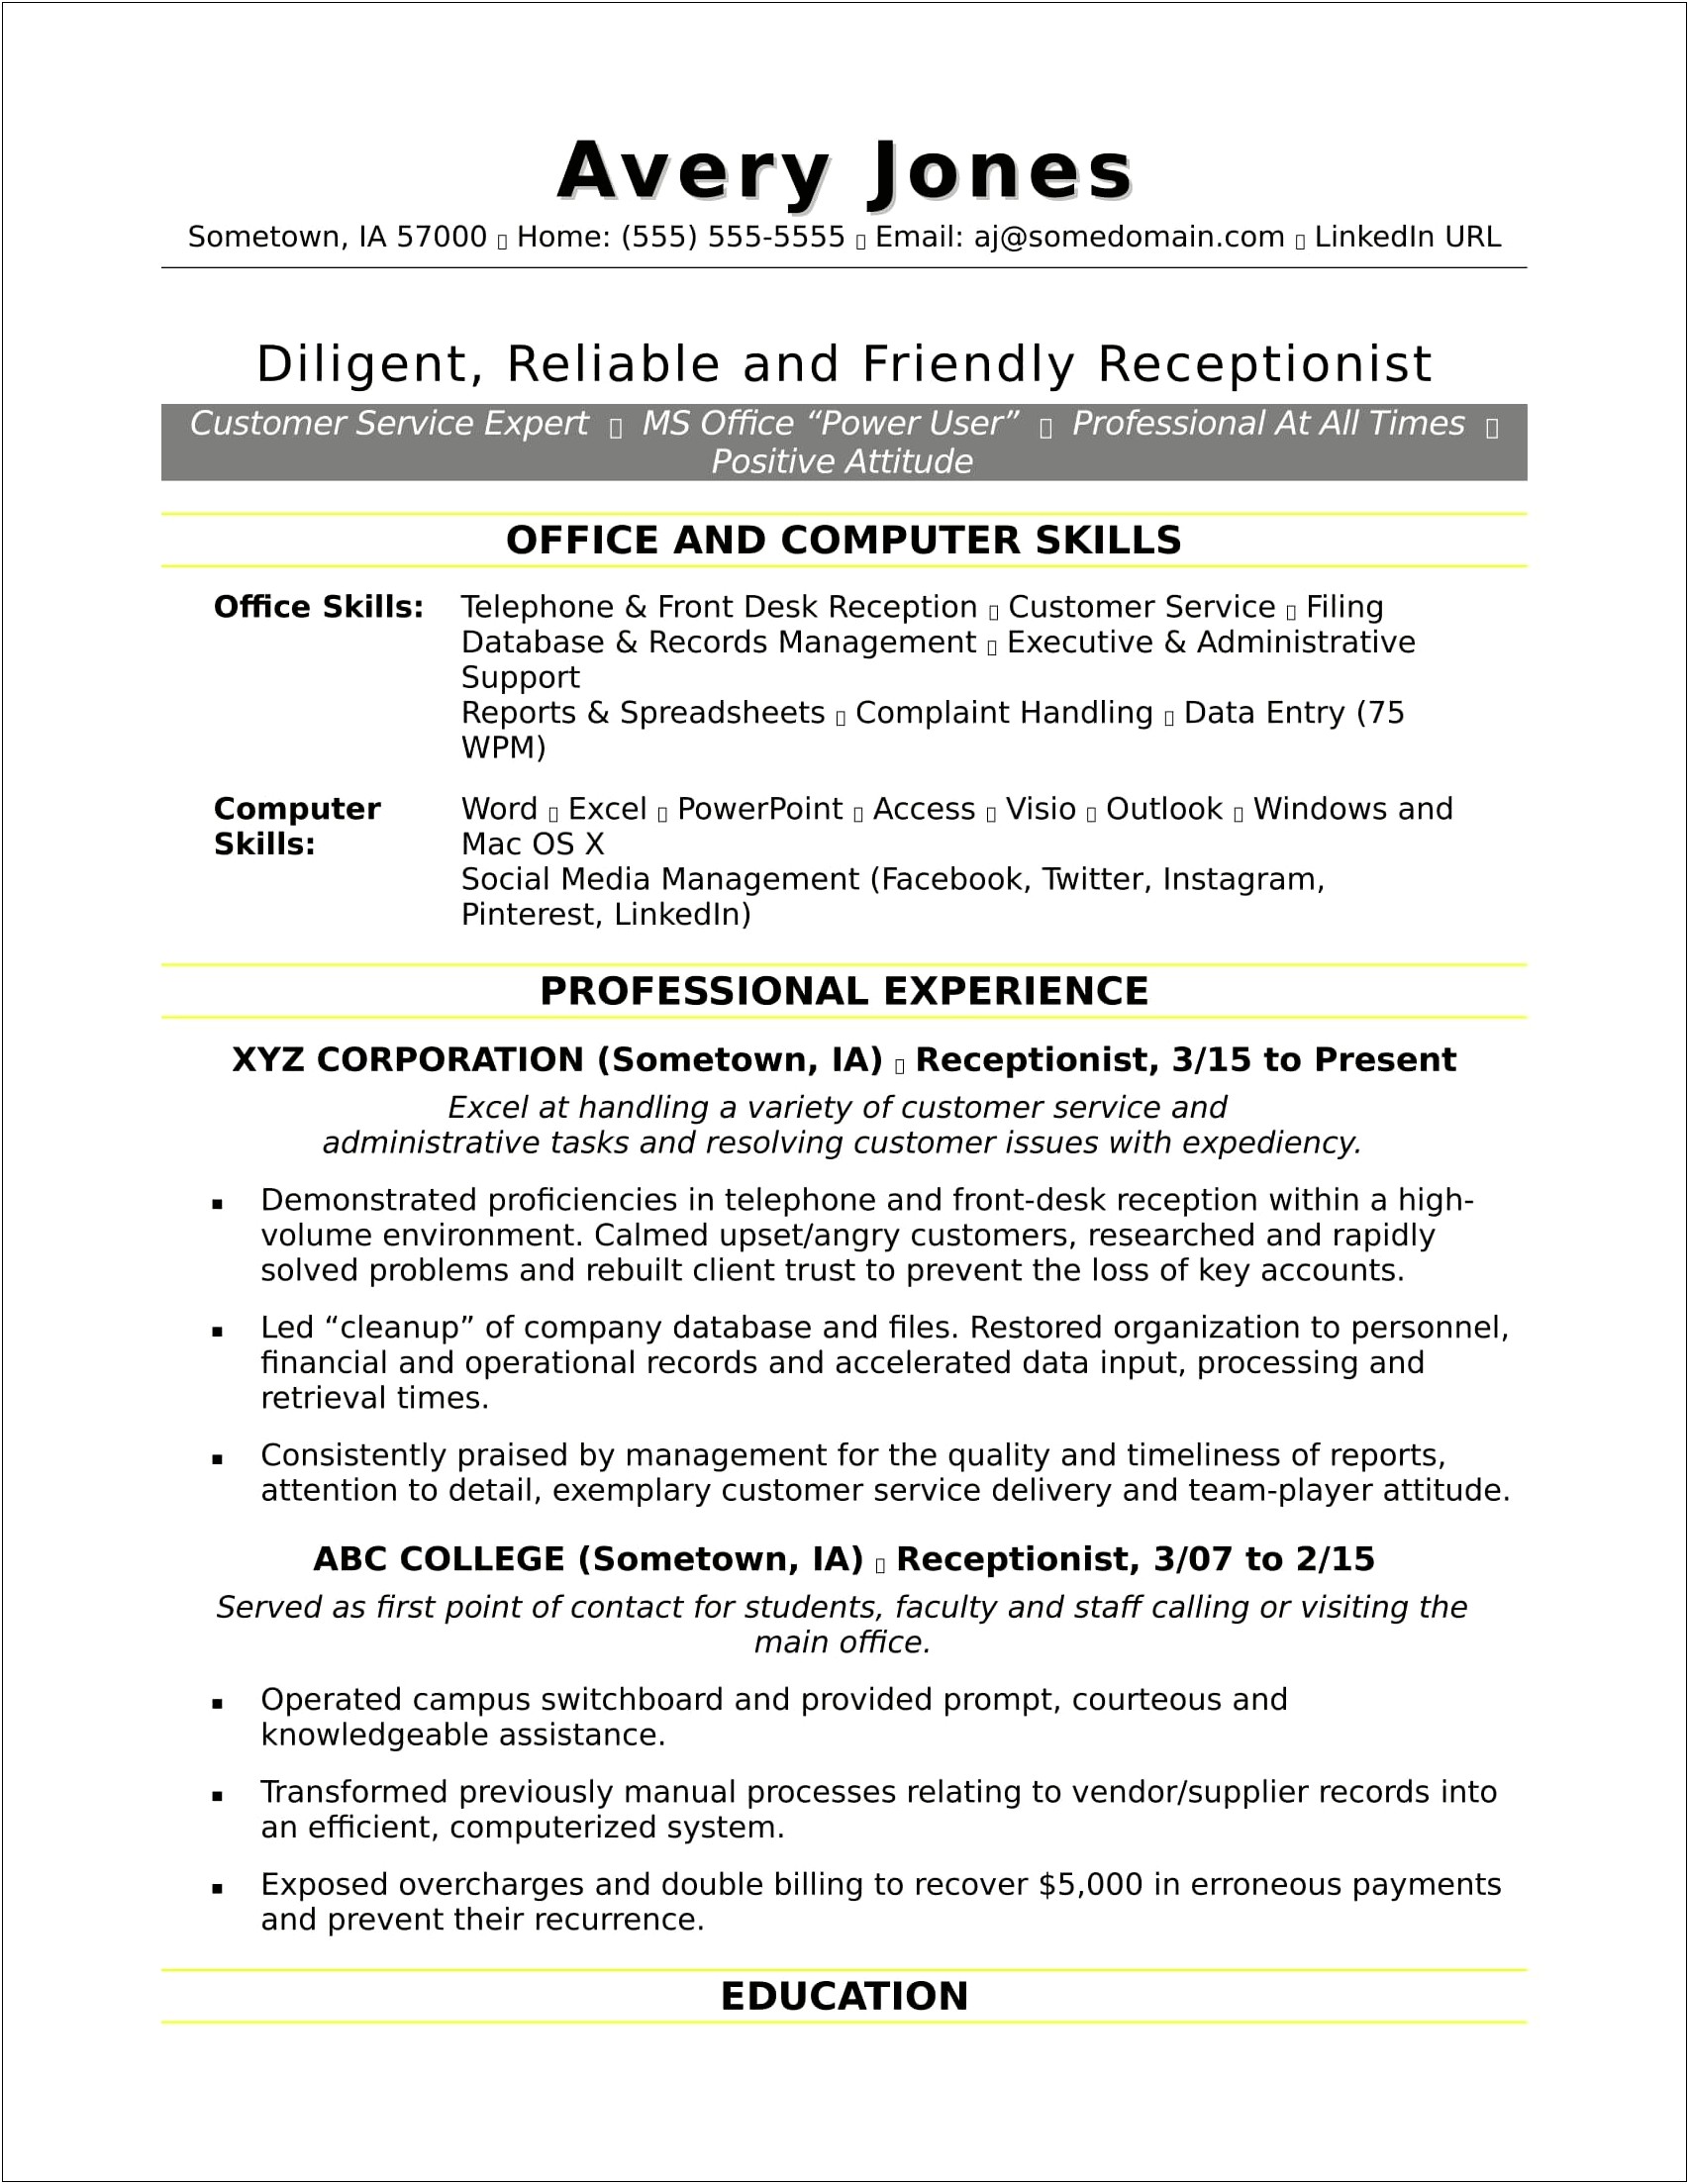 Where To Add Computer Skills On Resume